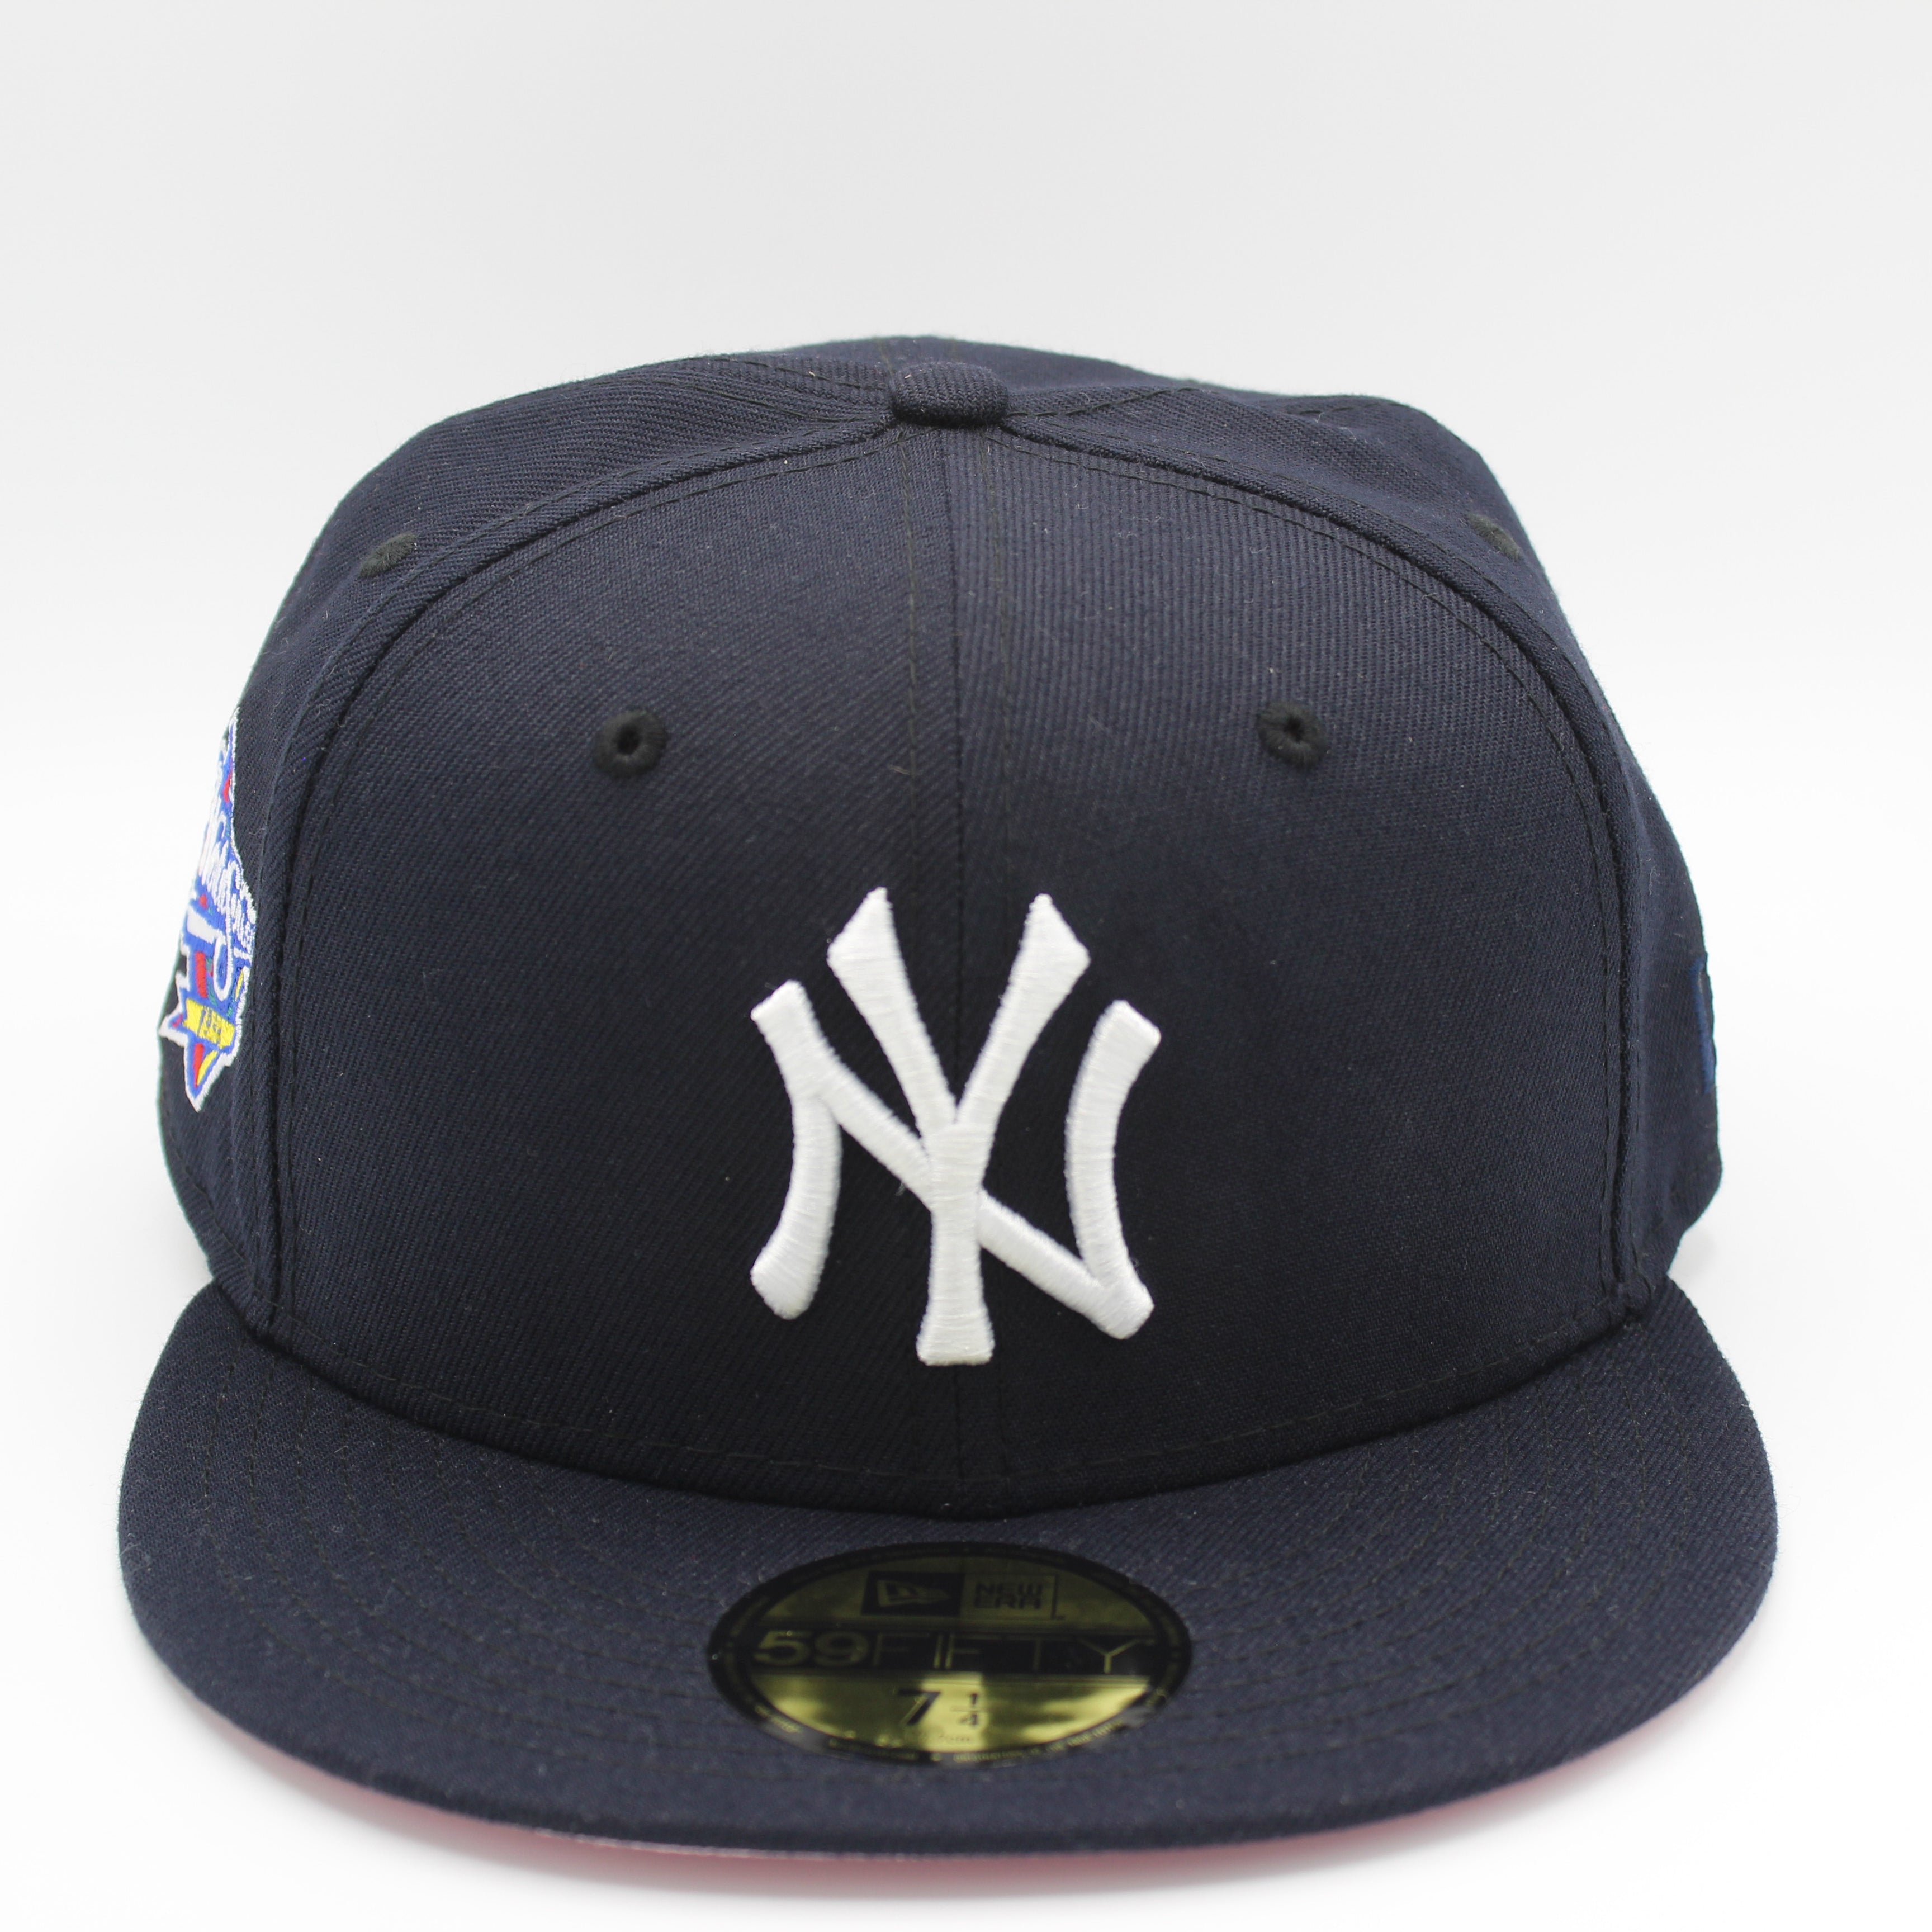 MLB State Park 59Fifty Fitted Hat Collection by MLB x New Era